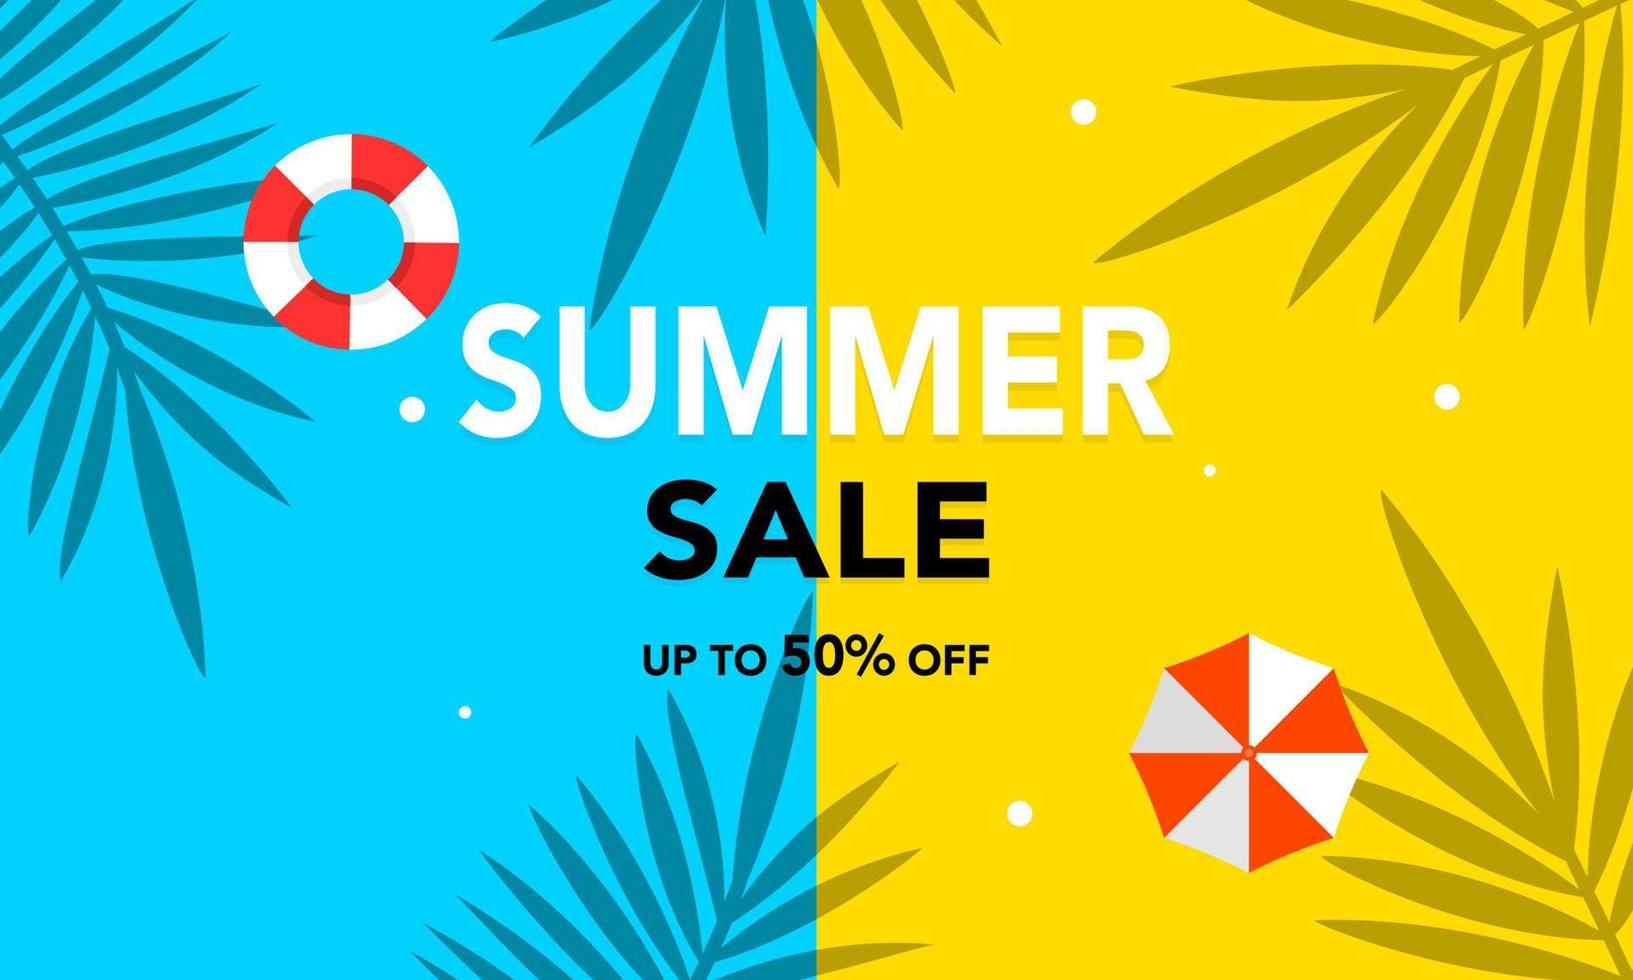 Summer sale poster or banner. Summer sale with discount text and two-tone background vector